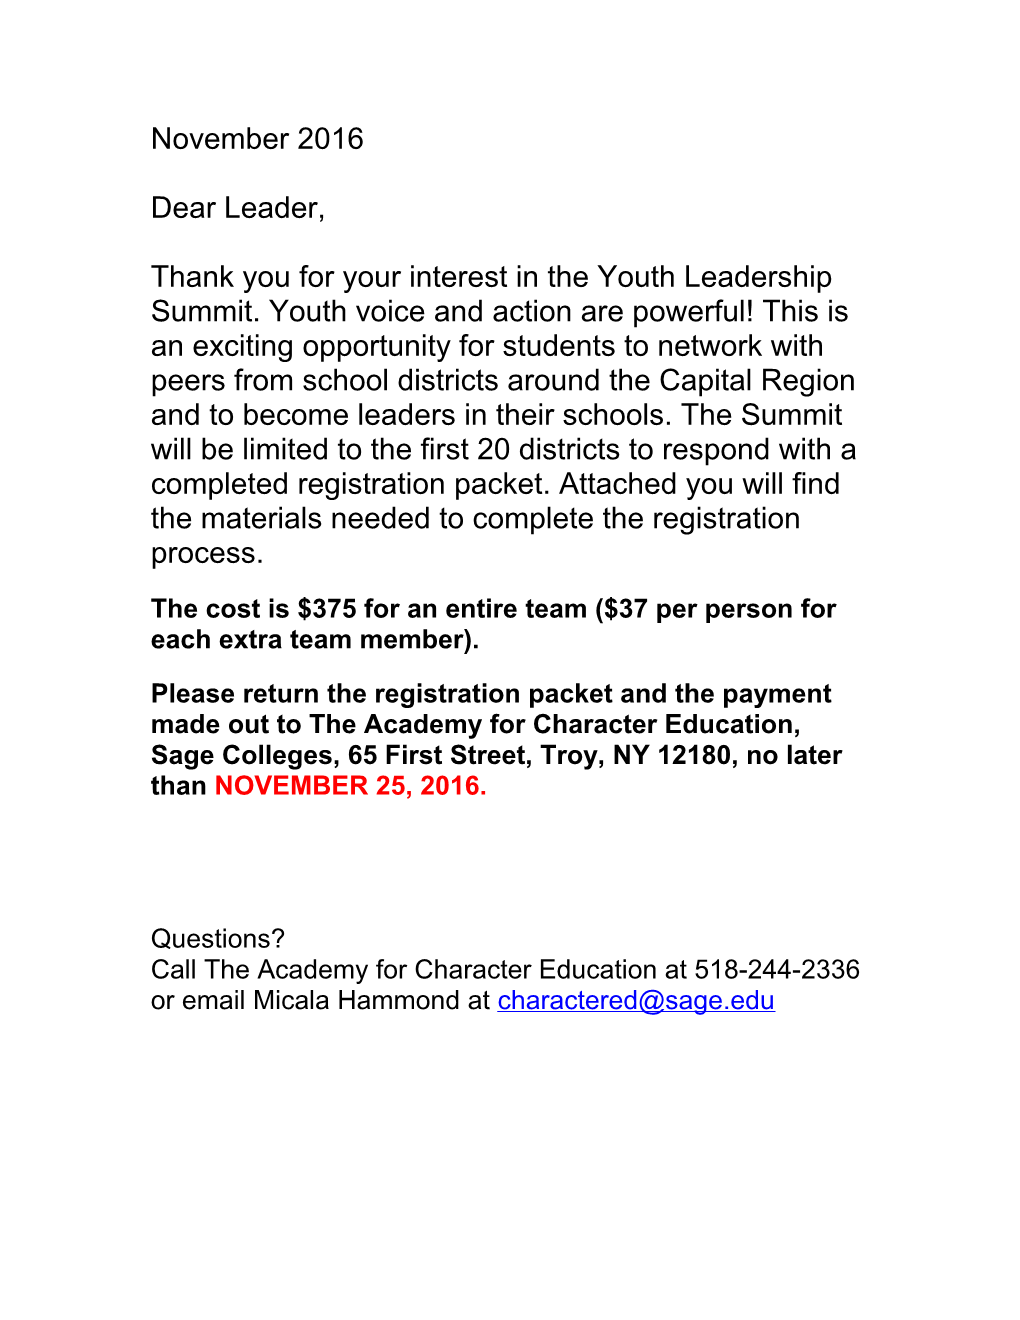 Thank You for Your Interest in the Youth Leadership Summit